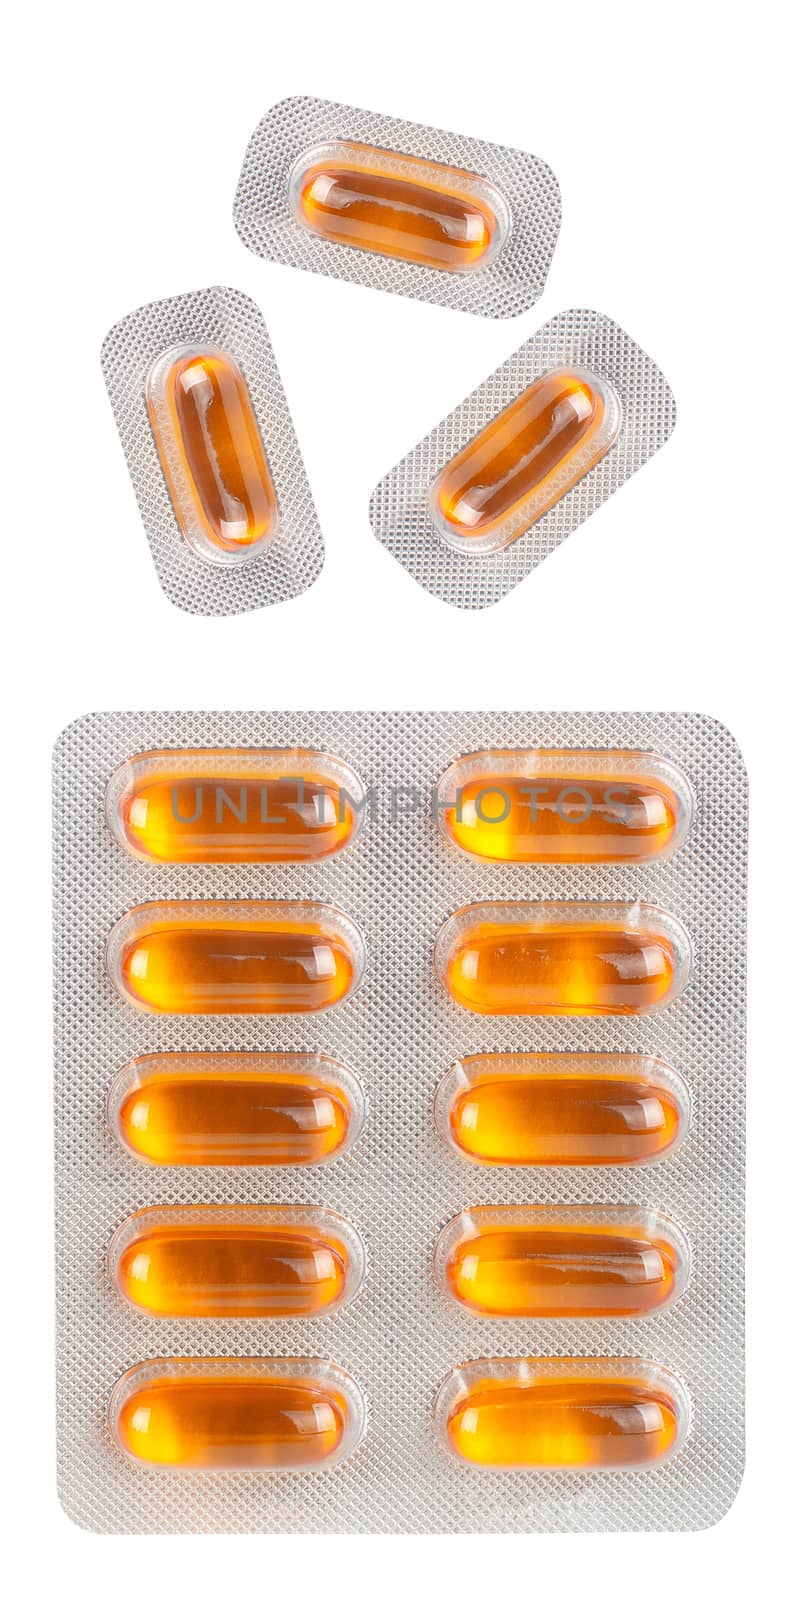 Pills in blister packs as a background by ozaiachin